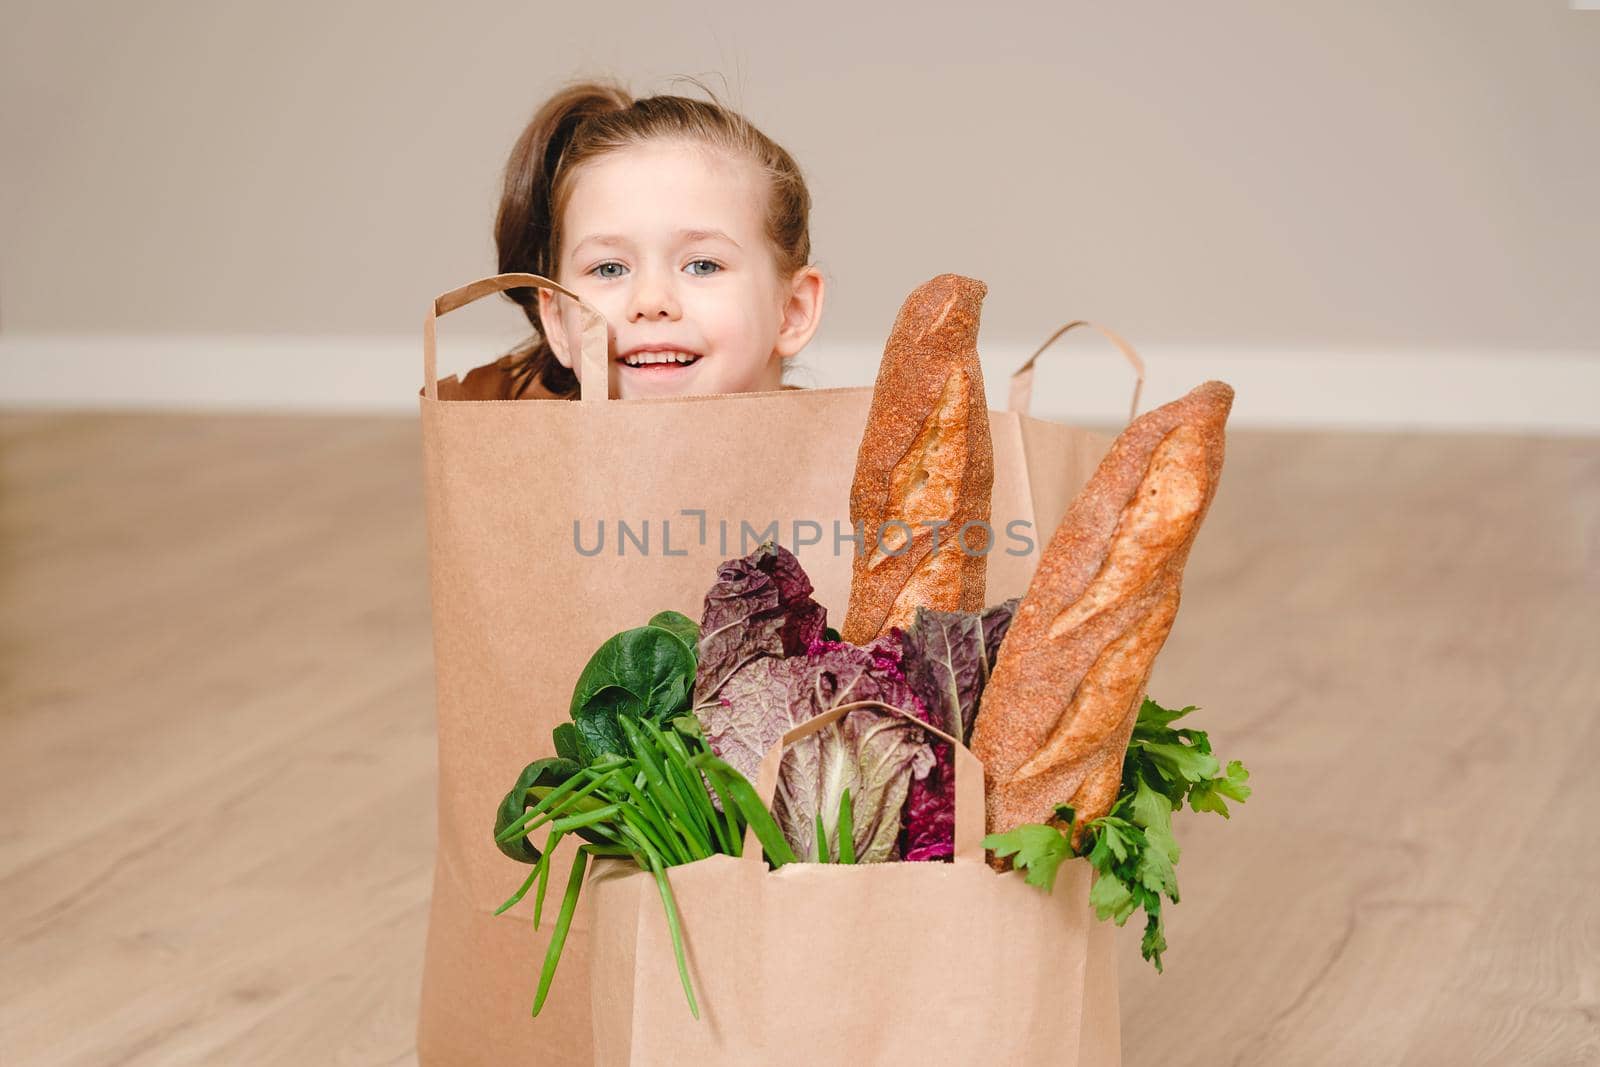 Paper bag with vegetables and some bread with copy space